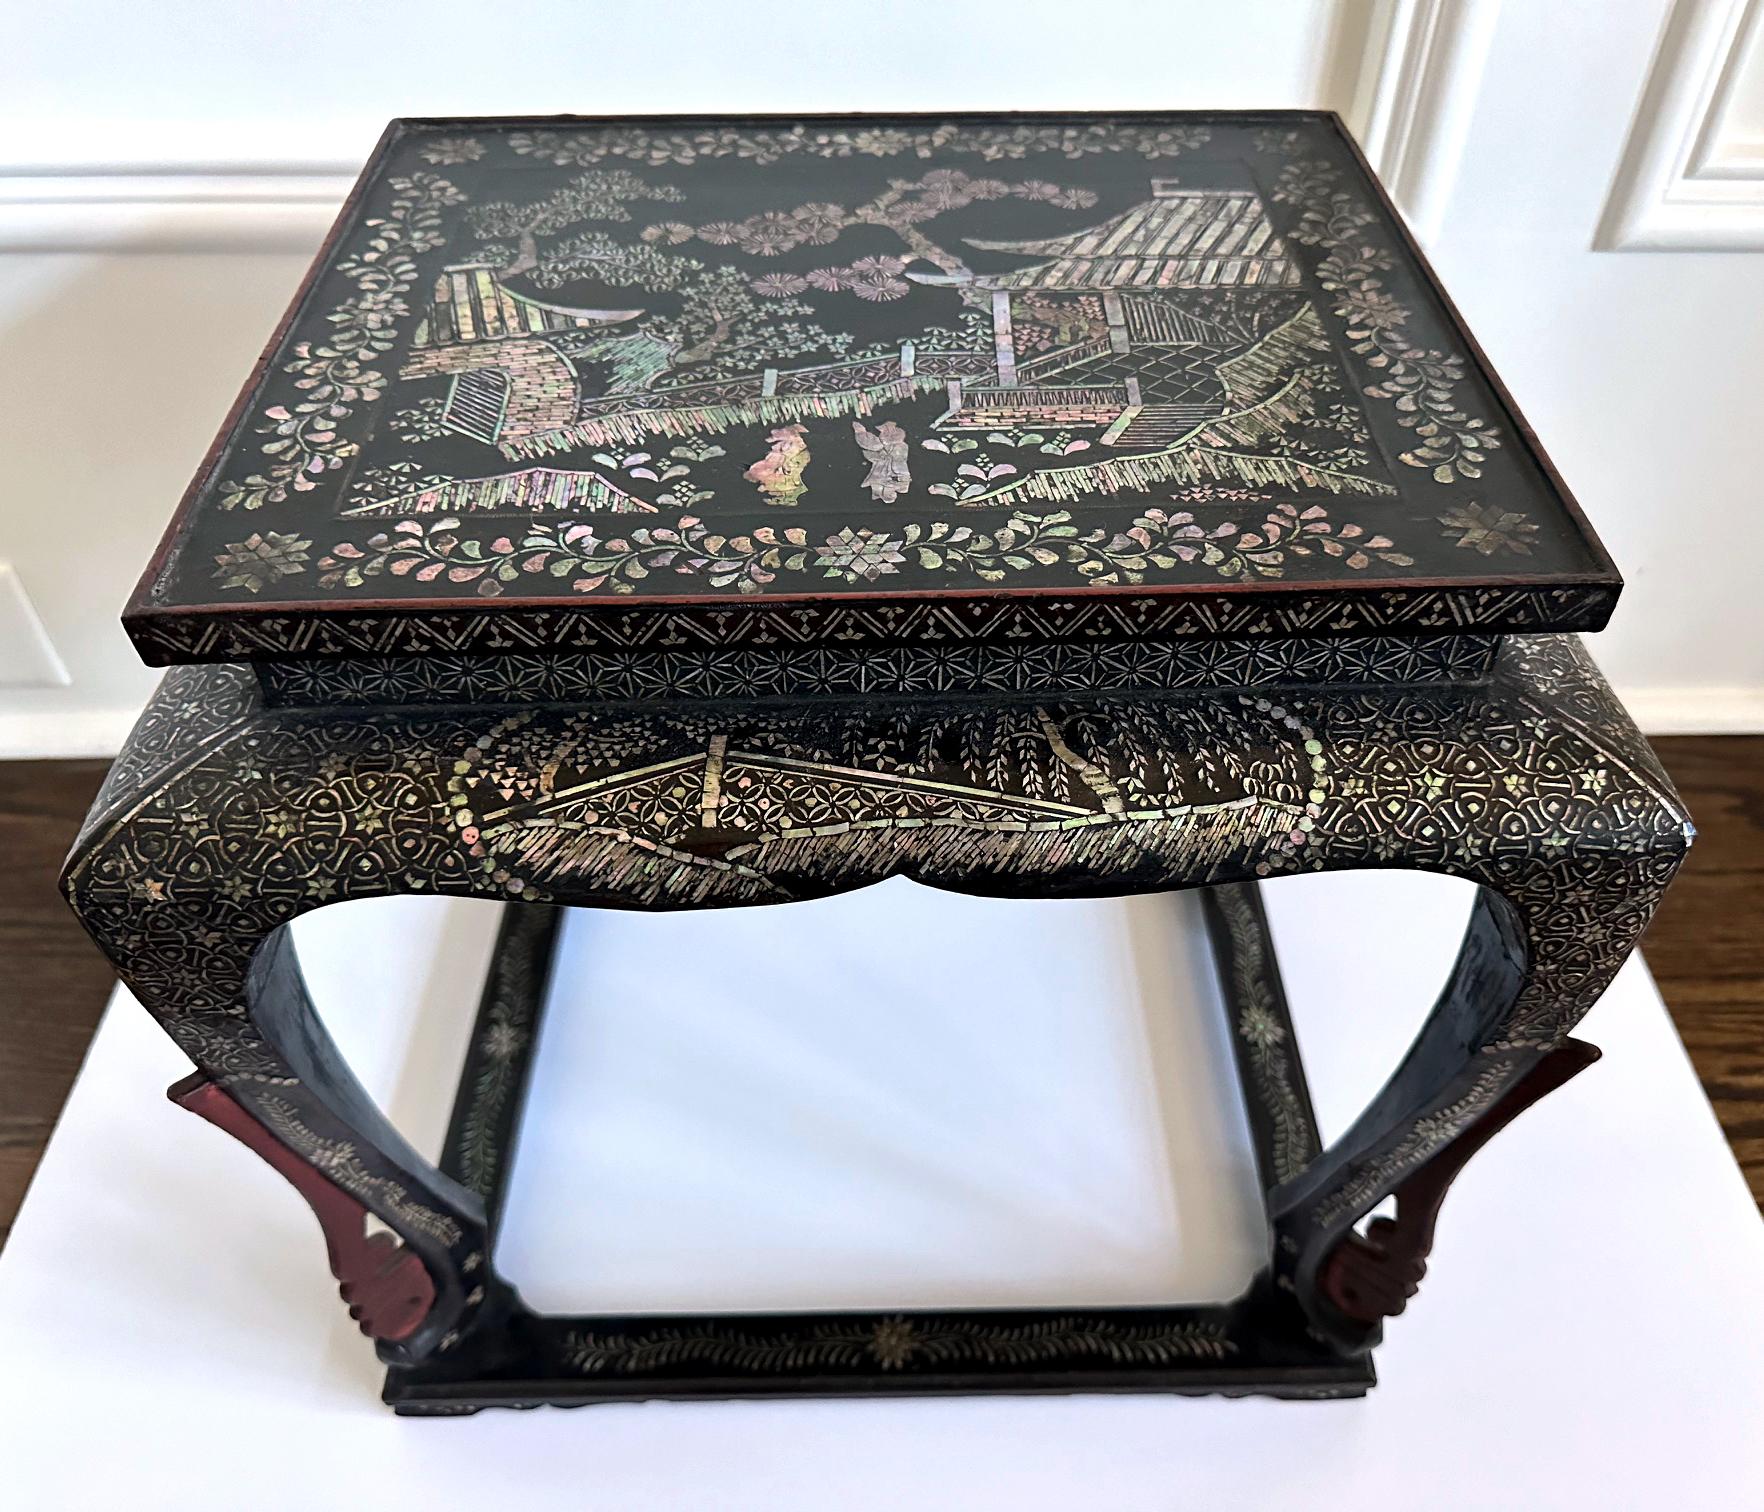 A small square-form table with lacquer and intricate mother-of-pearl inlay design from Ryukyu Islands kingdom circa 17-18th century. Ryukyuan kingdom was used to be an independent island country until it was officially annexed by Japan in 1879